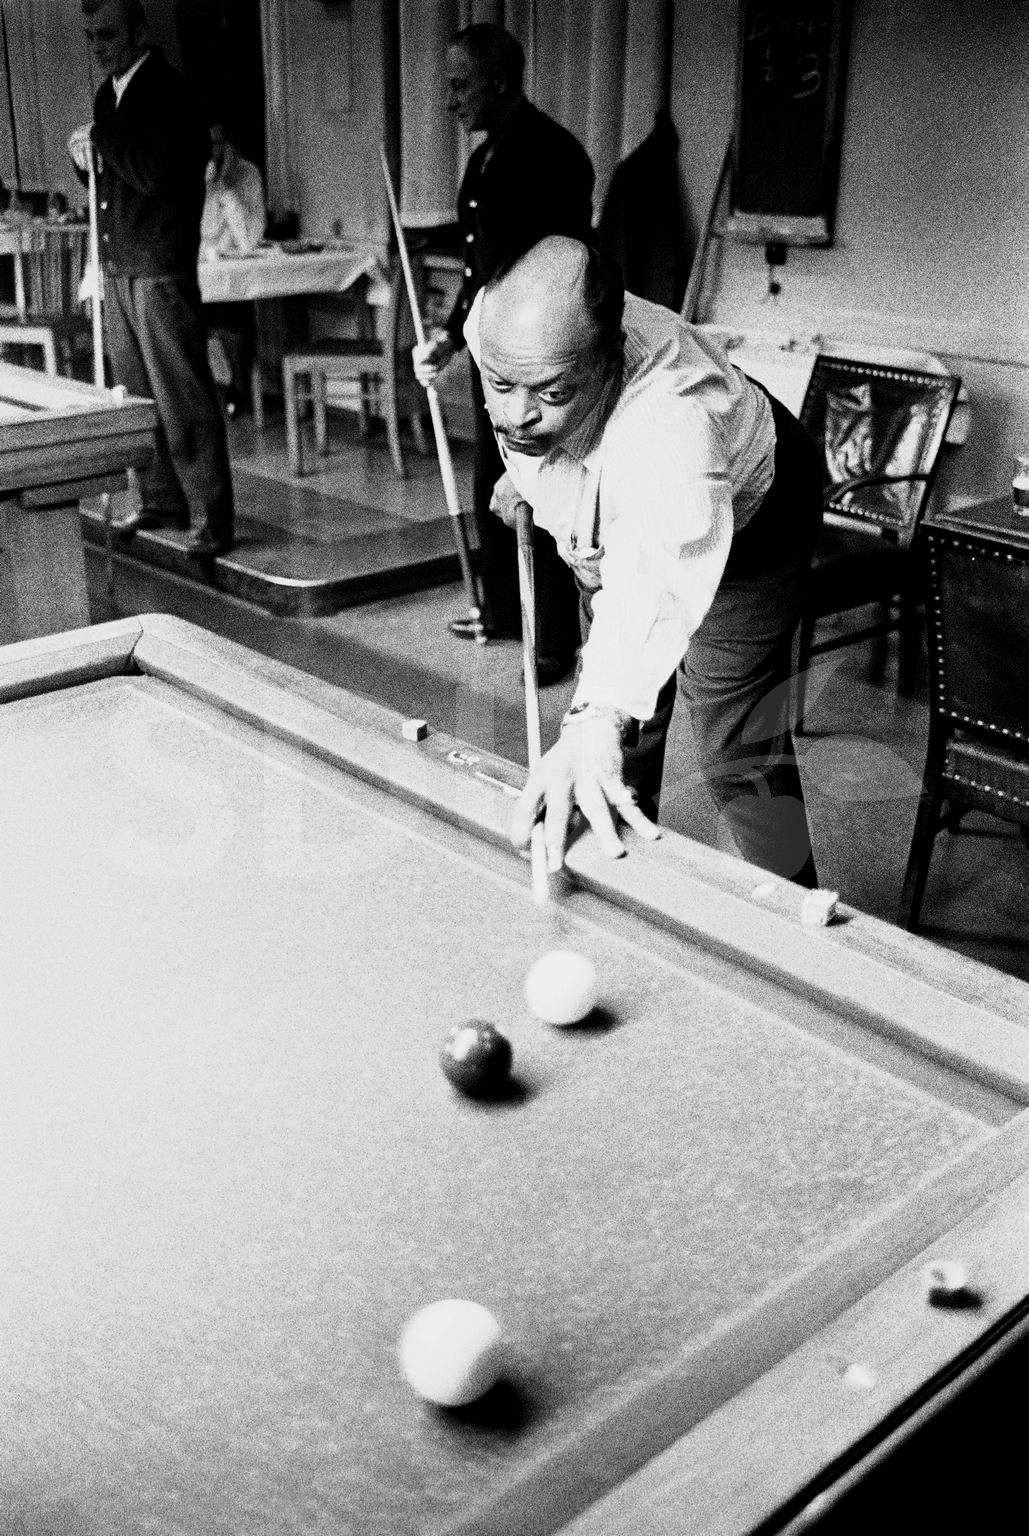 Ben Webster. Playing poole with Don Byas, in Copenhagen, 1965